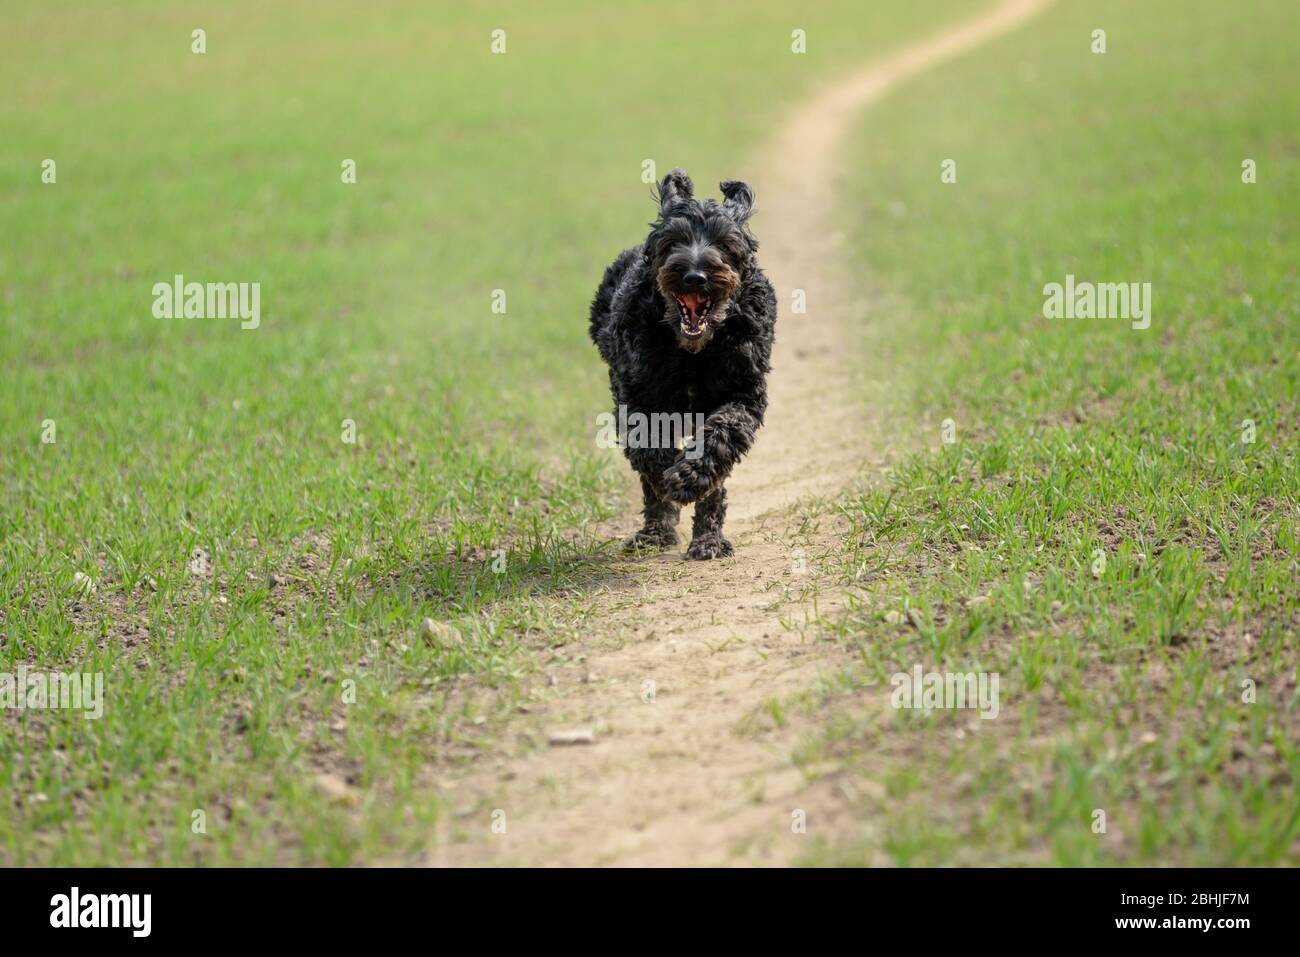 A Black Male Cockapoo dog running down a dusty track in the countryside. Stock Photo